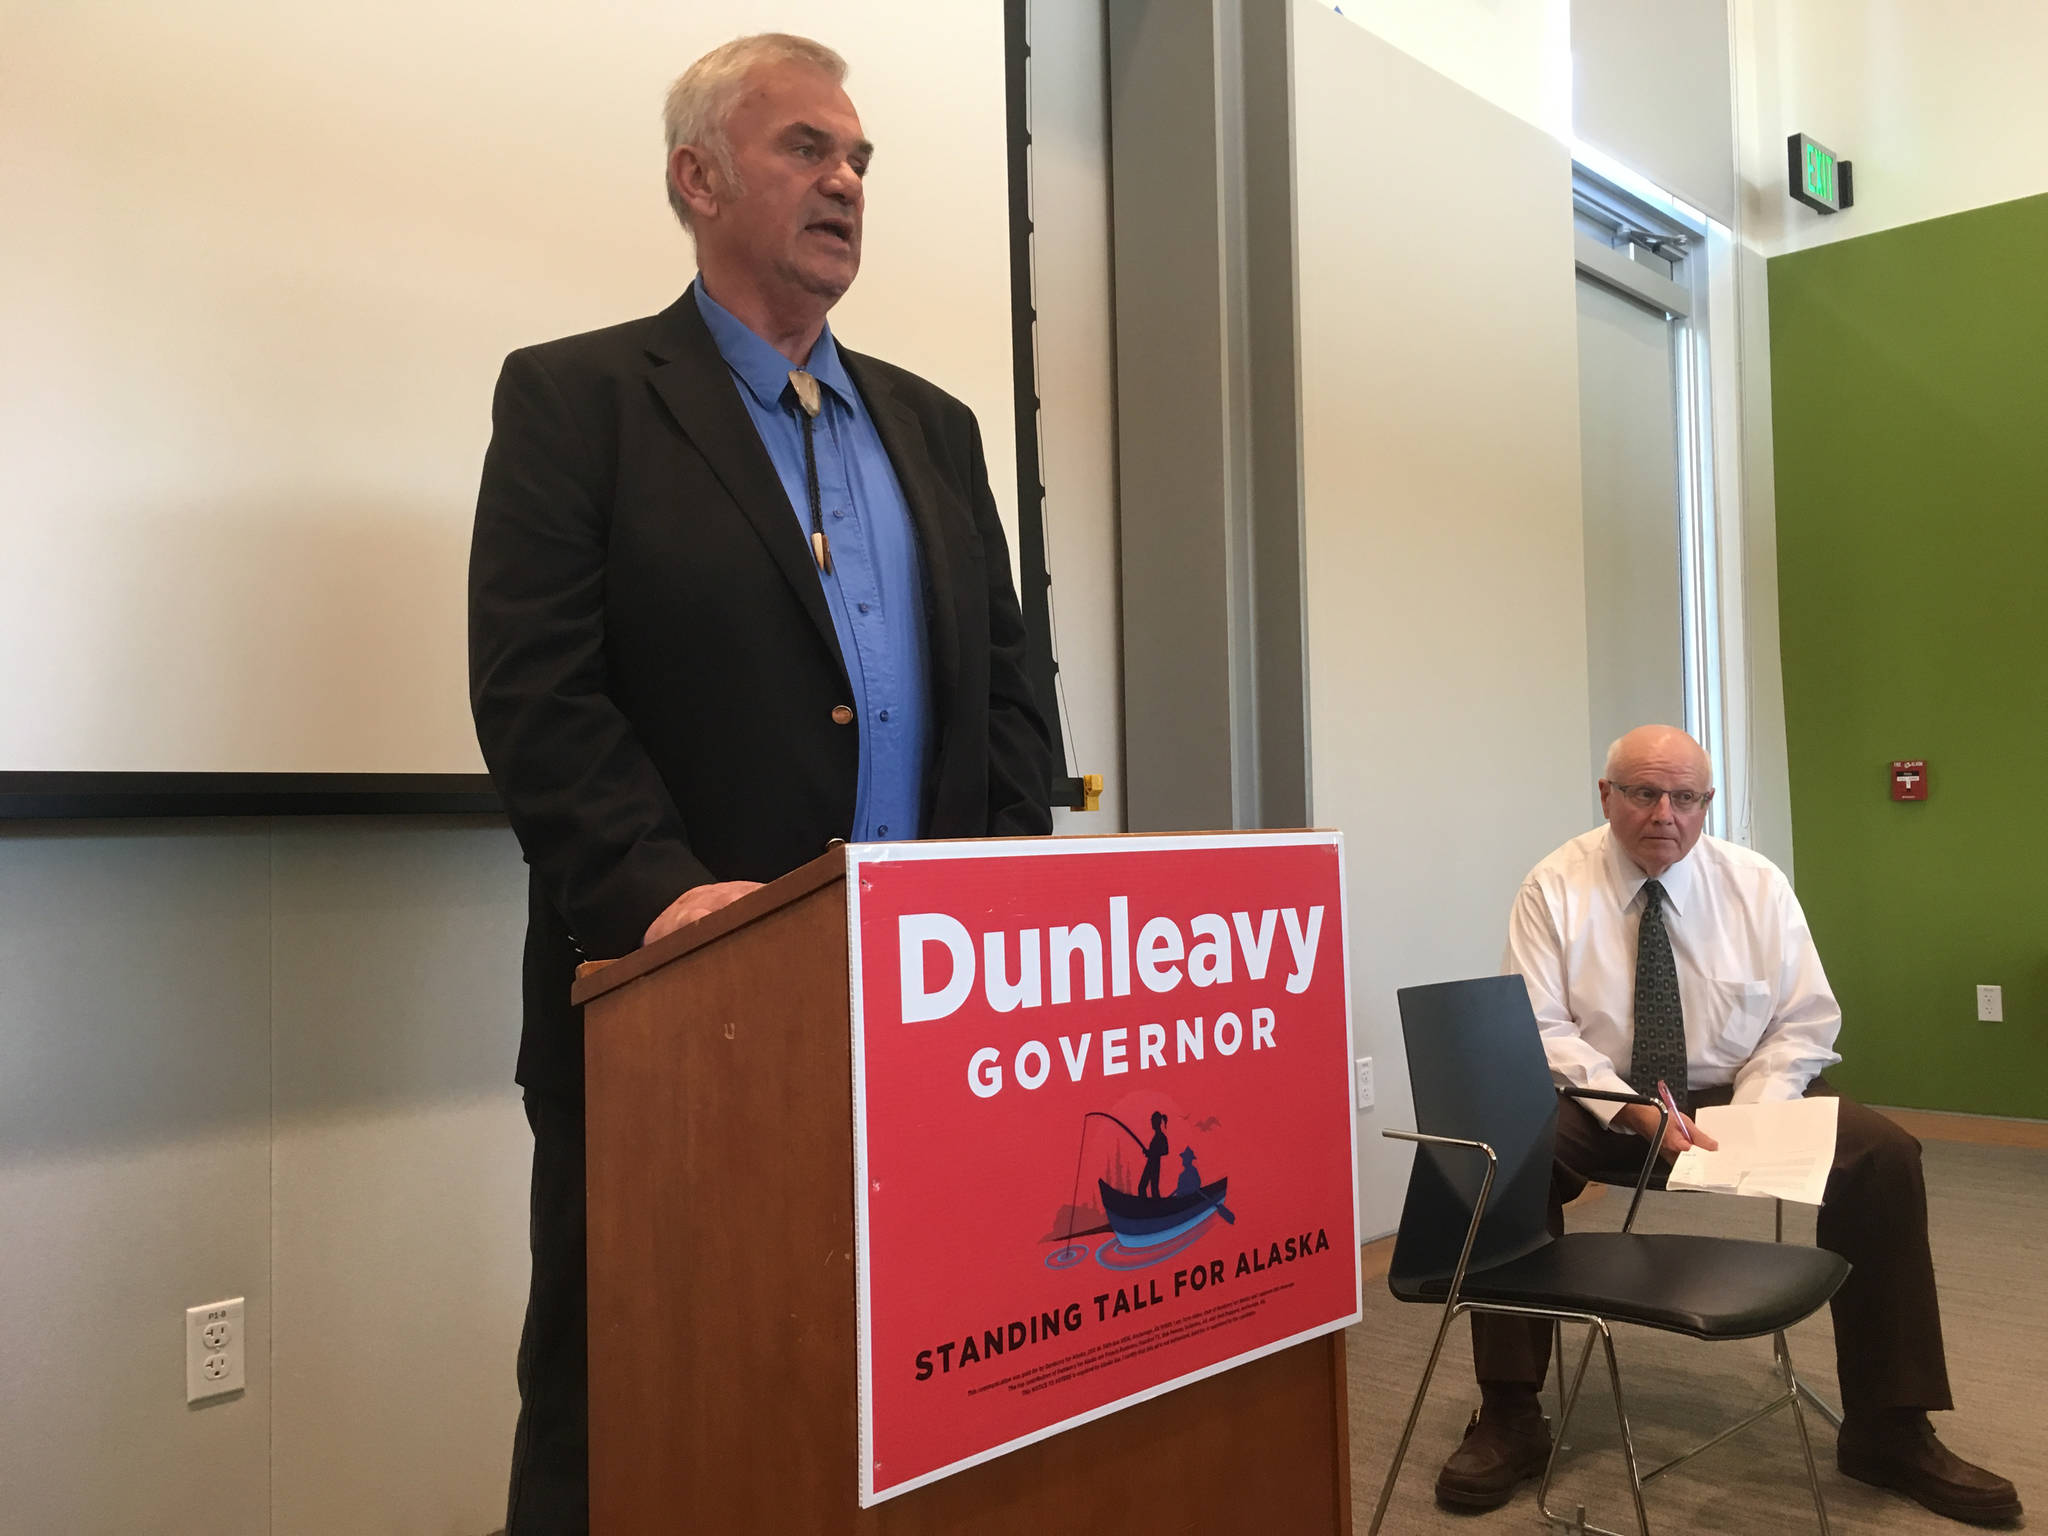 Senate District Q candidate Don Etheridge, left, tells his crime story at a Mike Dunleavy for governor campaign event Wednesday, Sept. 5, 2018 in the Mendenhall Valley Public Library. At right is Tom Boutin, one of the organizers of the event. (James Brooks | Juneau Empire)